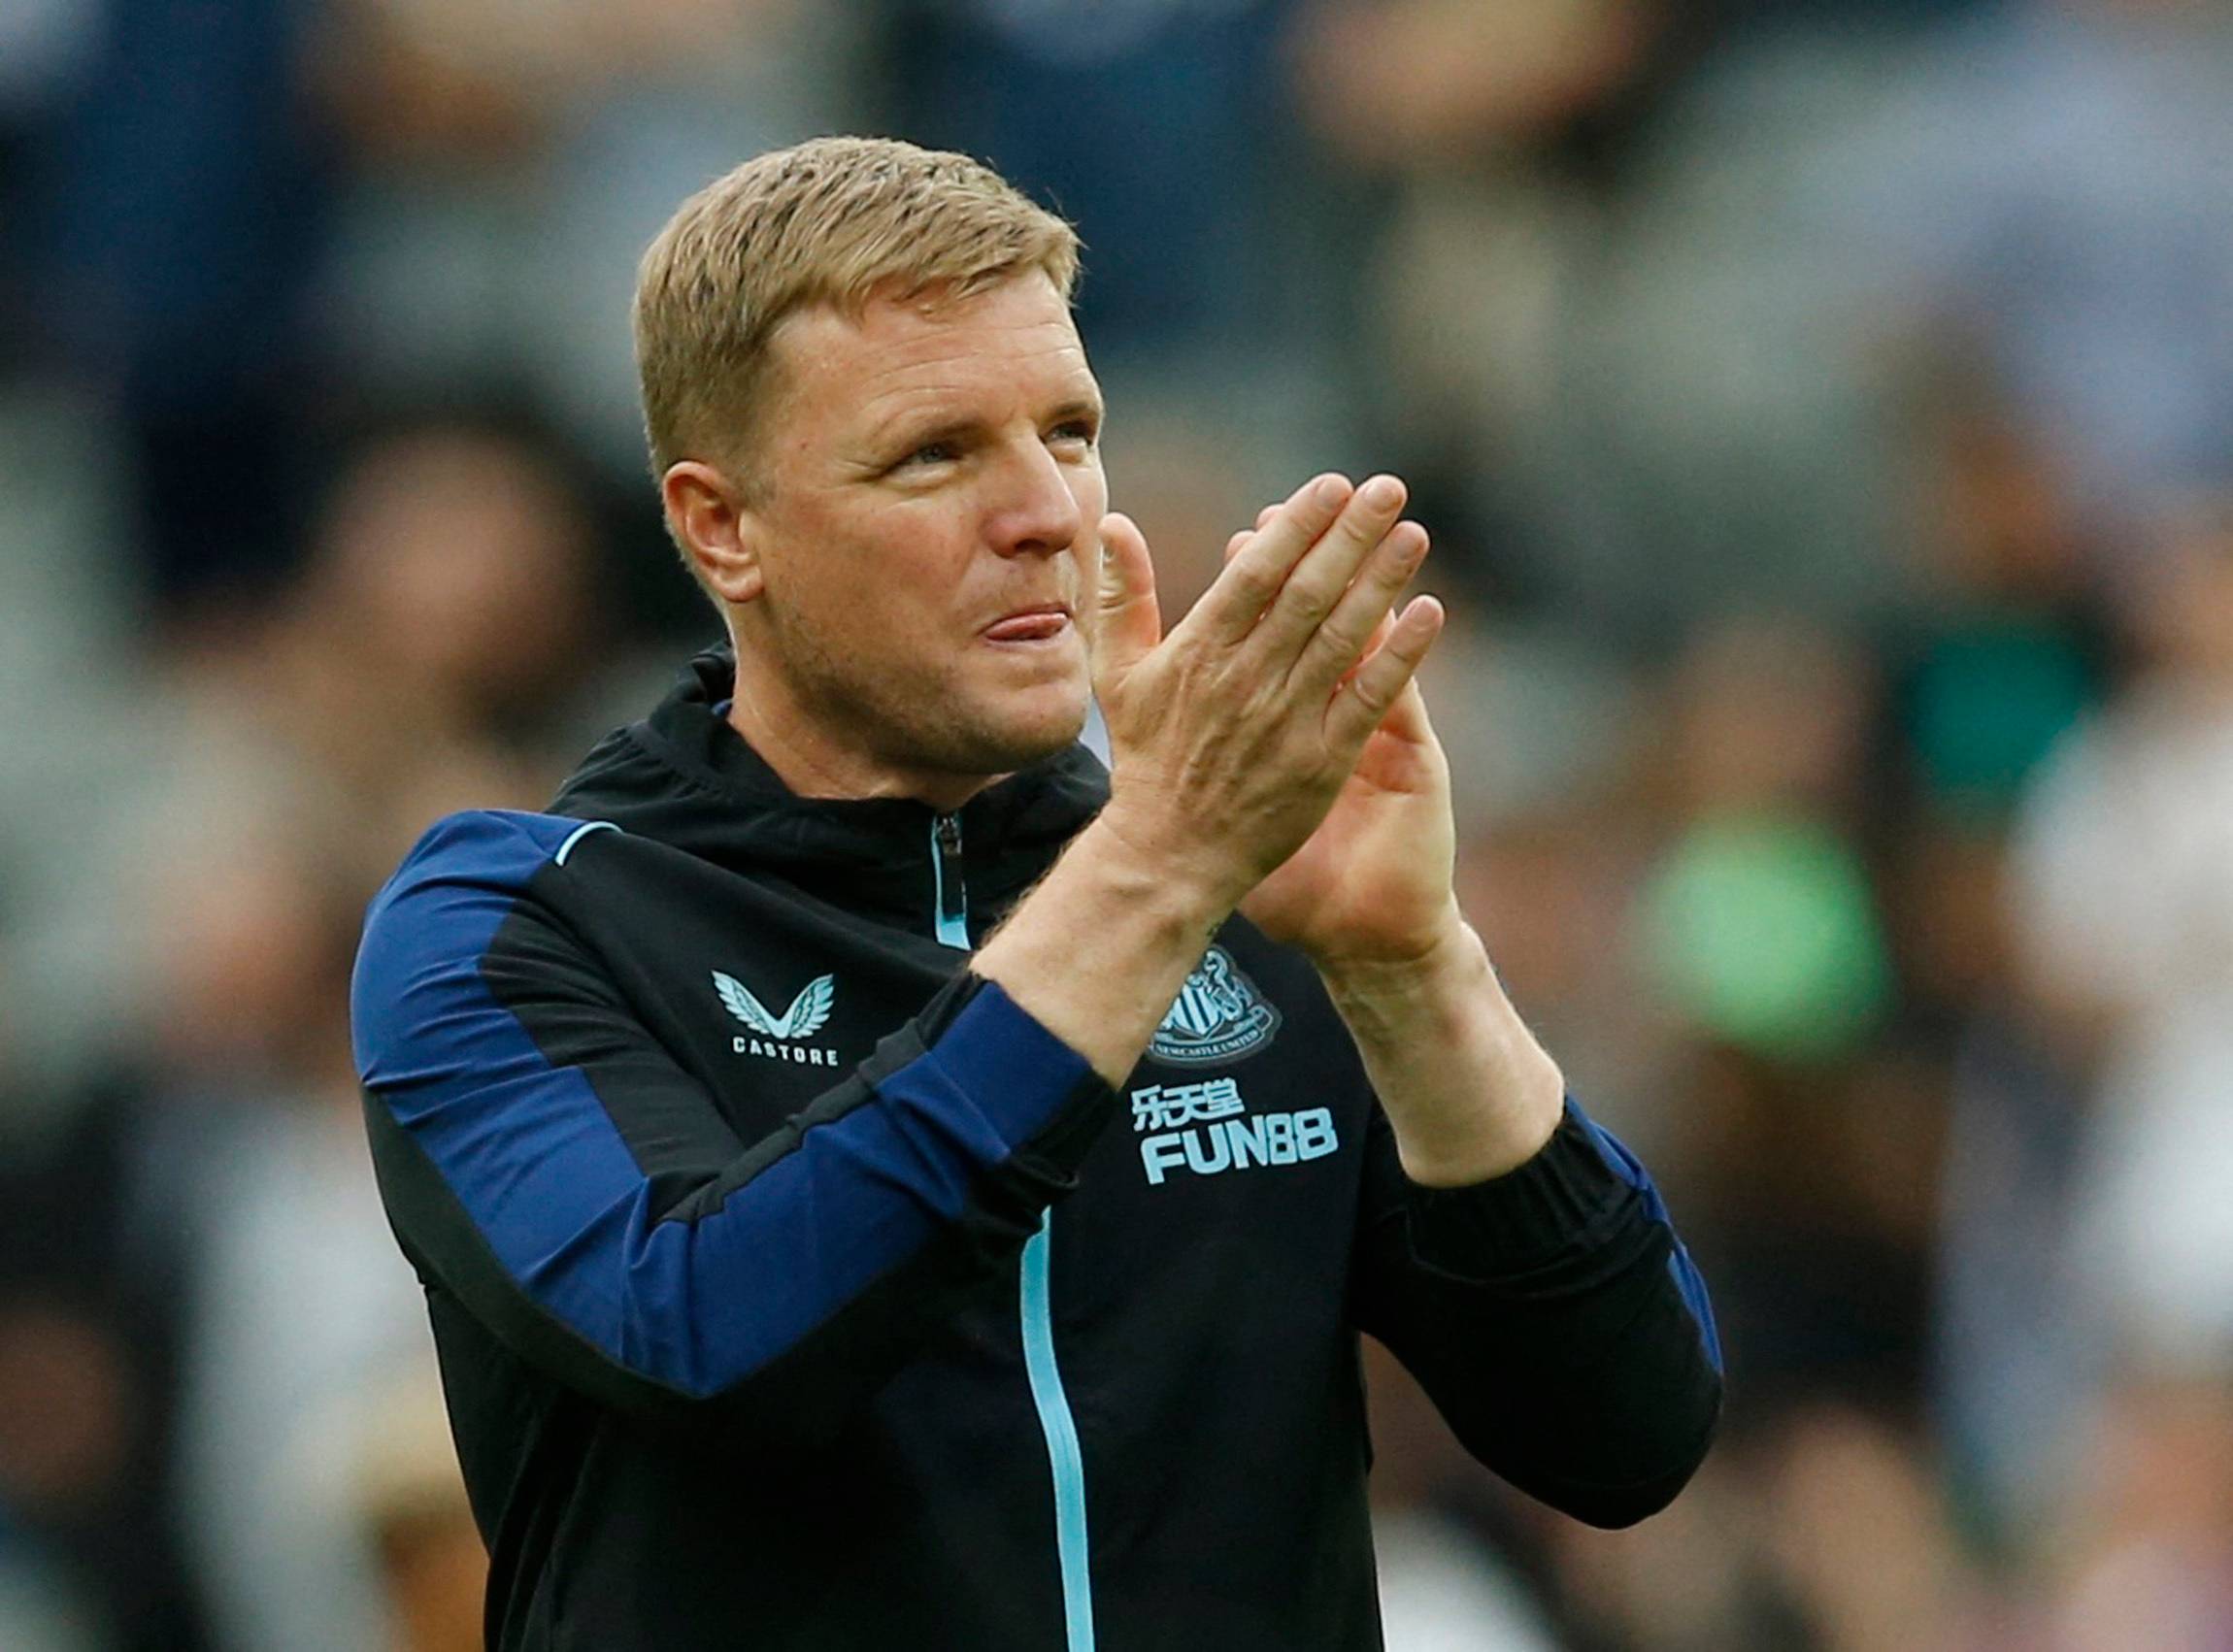 Newcastle United manager Eddie Howe claps supporters